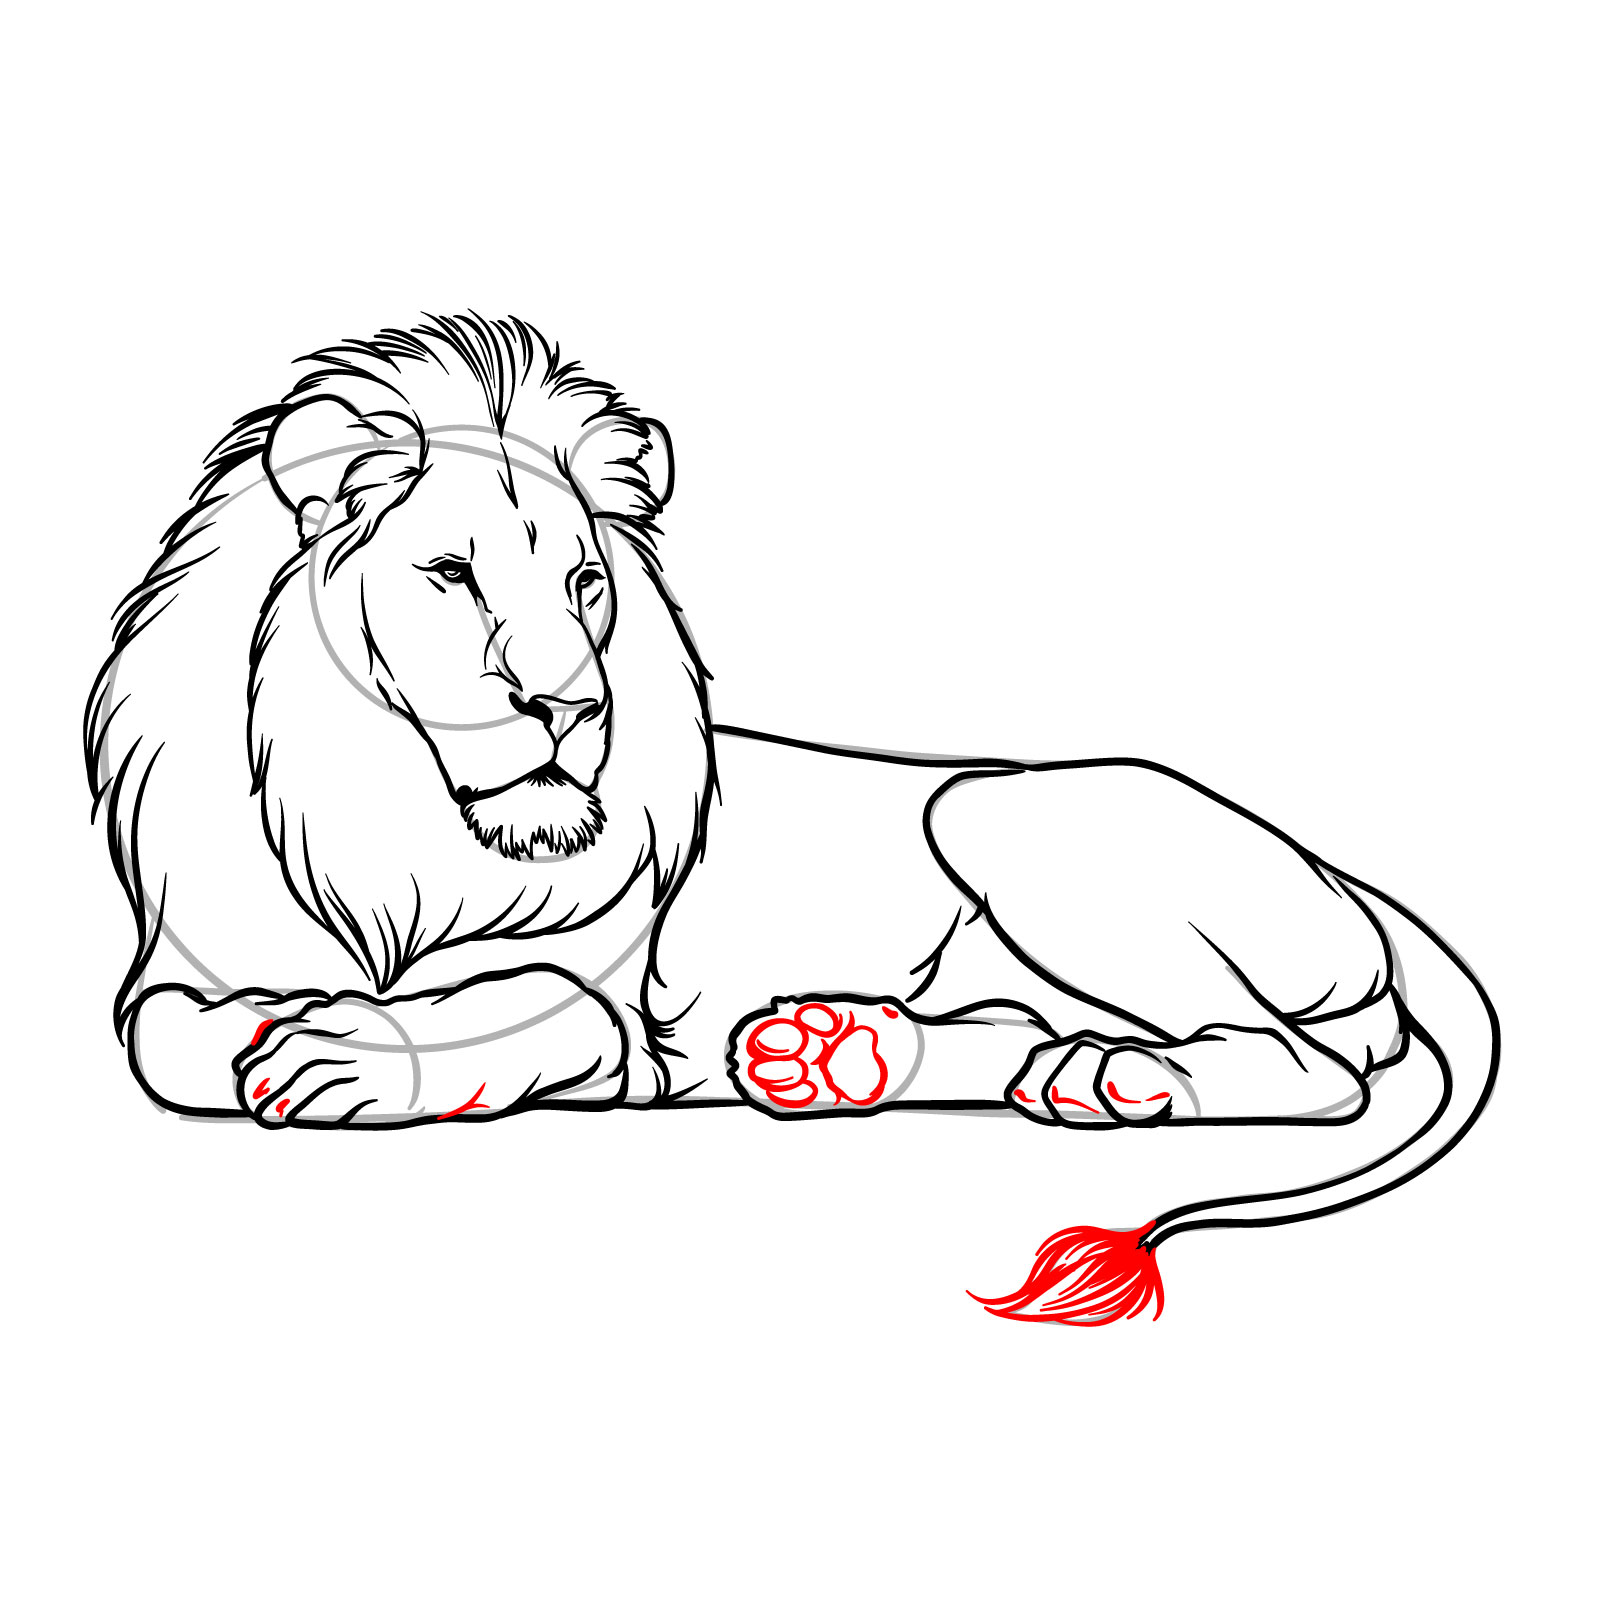 How to draw a lying lion in side view - Step 15: Detailing the second rear leg and adding paw pads